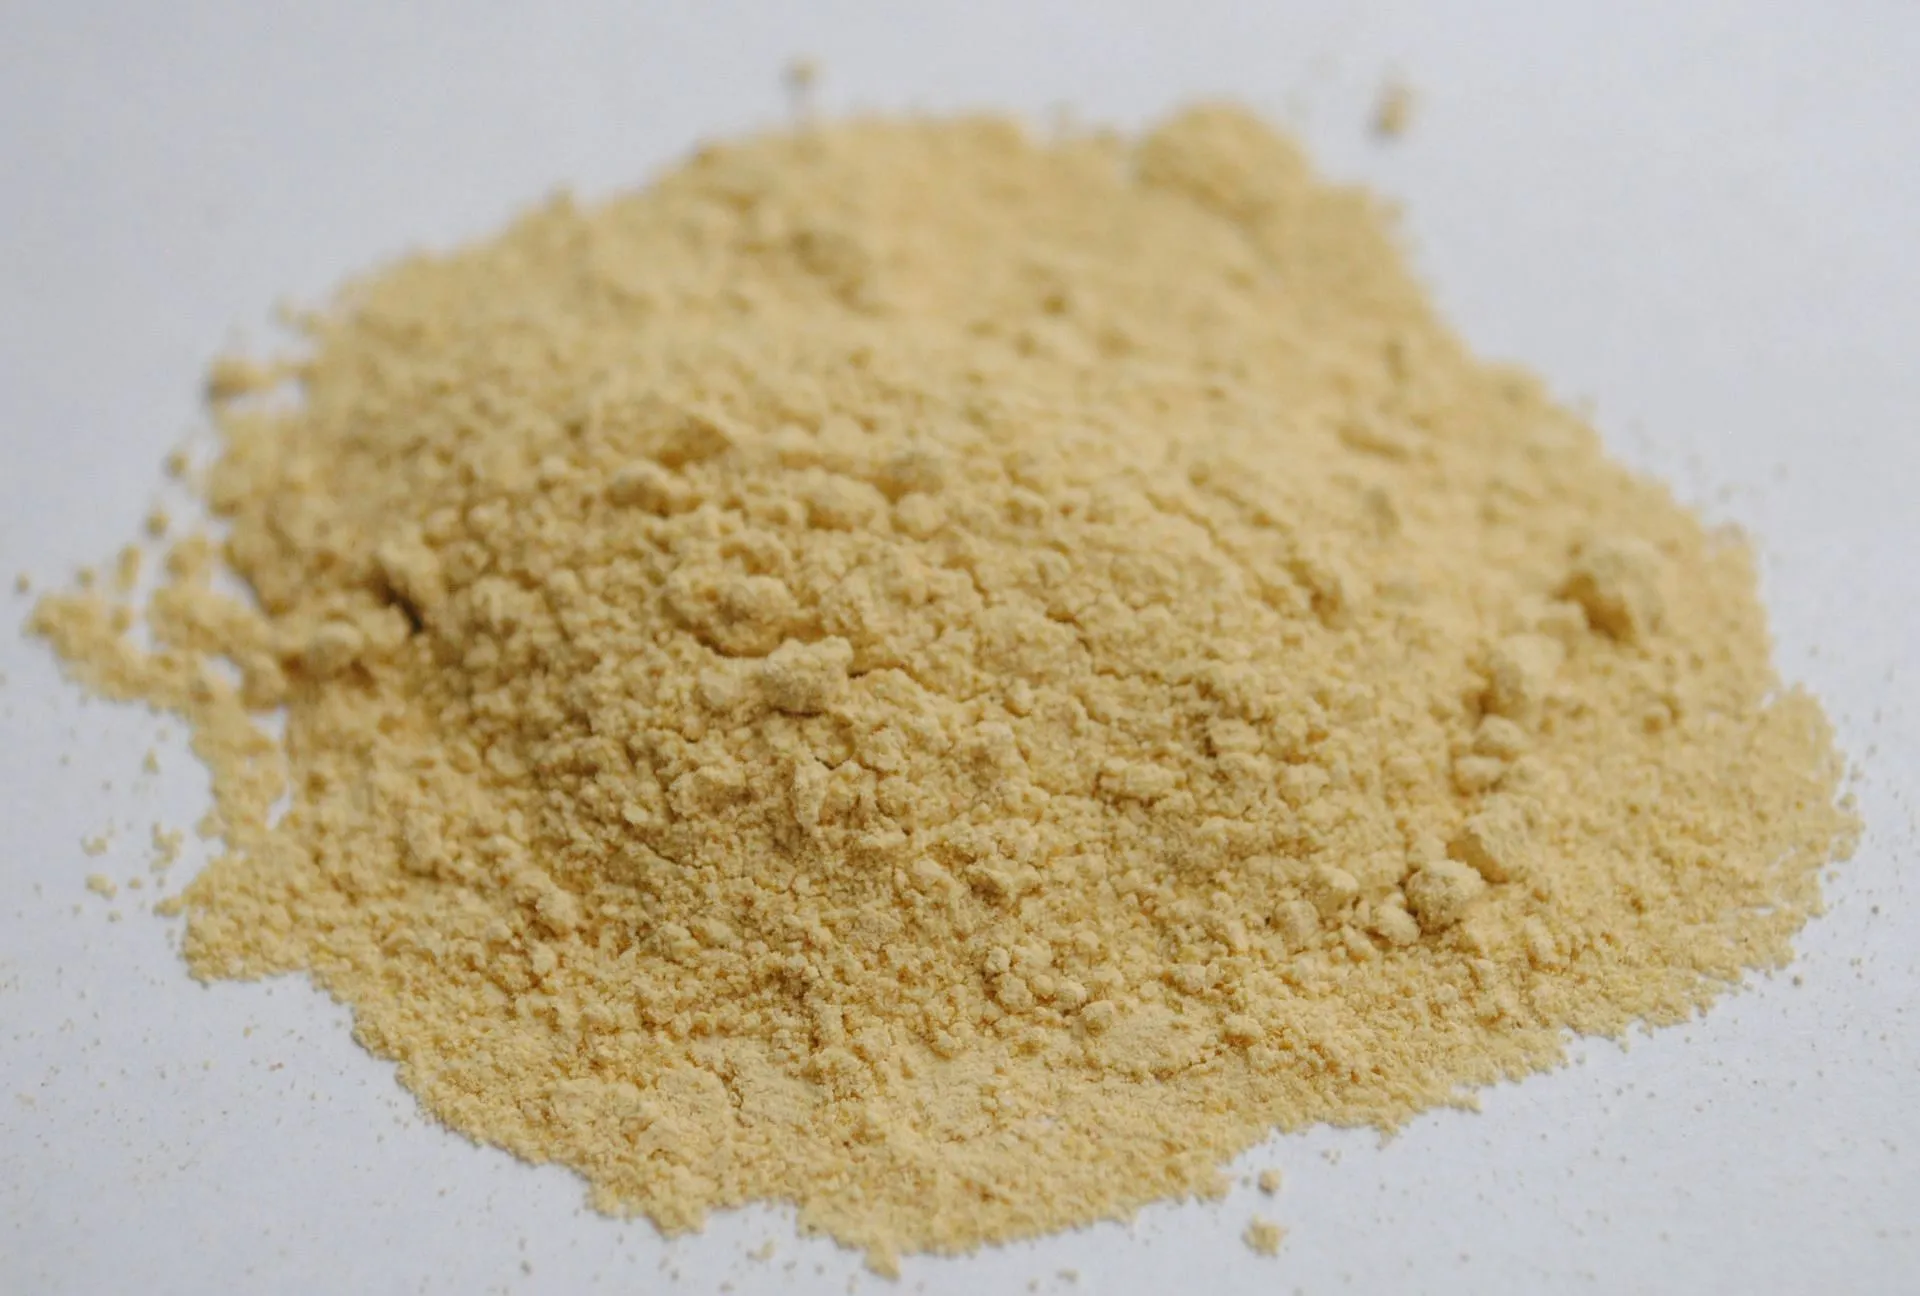 Ginger powder is made with dehydrated ginger (Image via Unsplash/ David Gabrielyan)